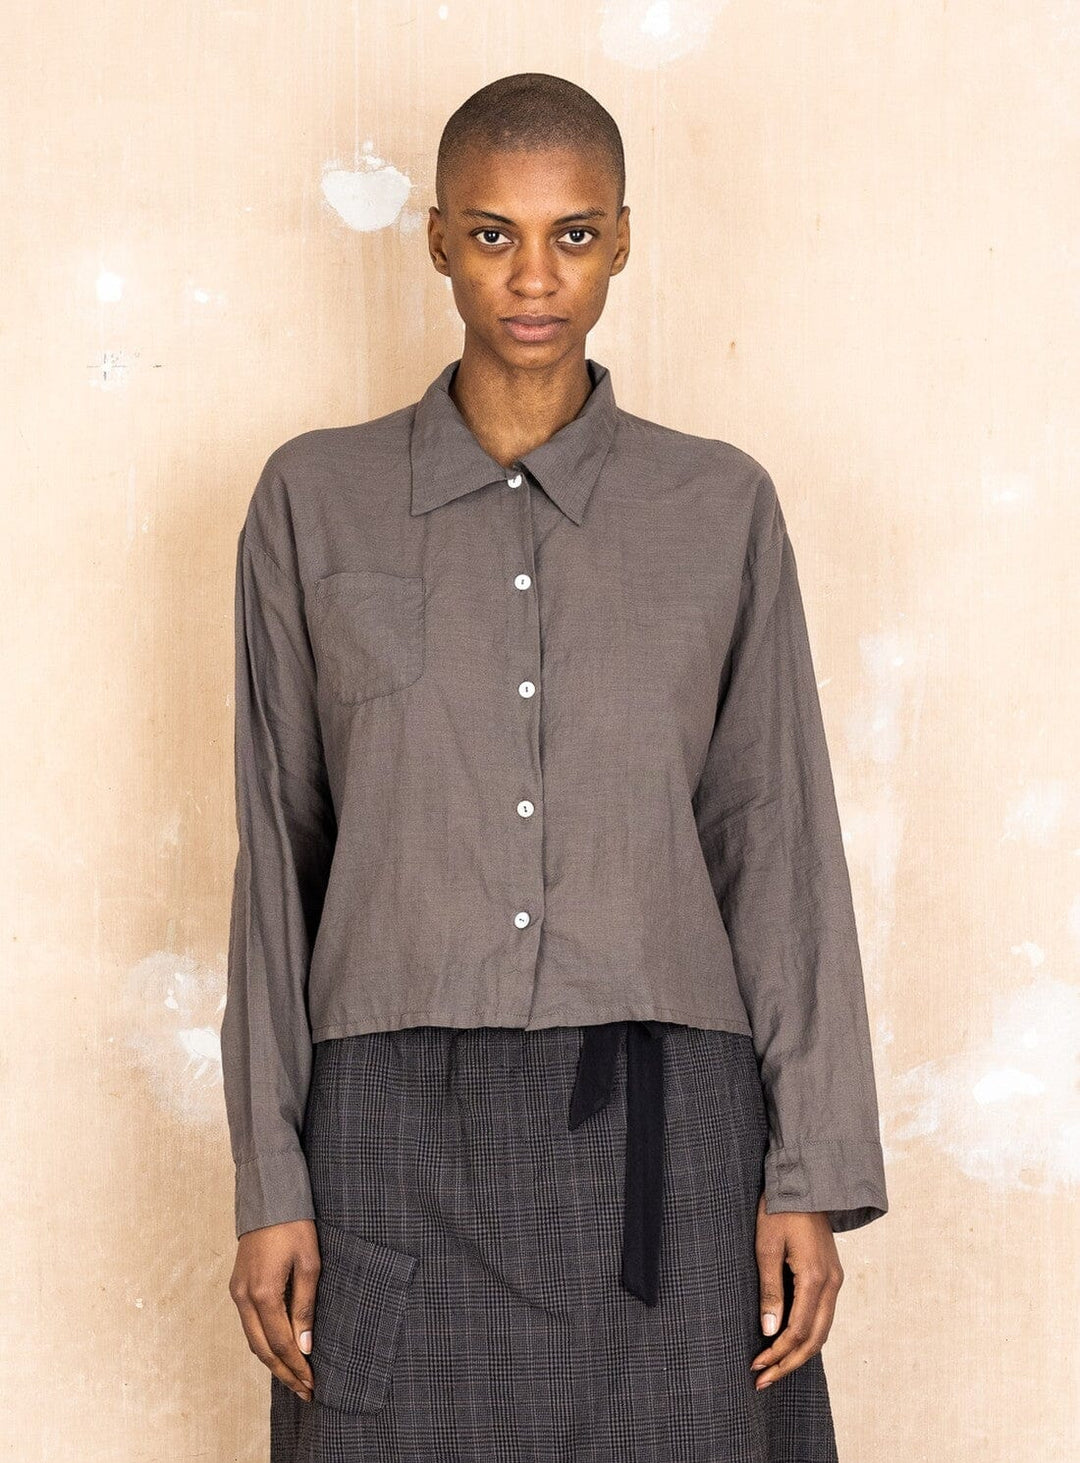 Cromity Shirt in Smoked Pearl Tops YBDFinds 